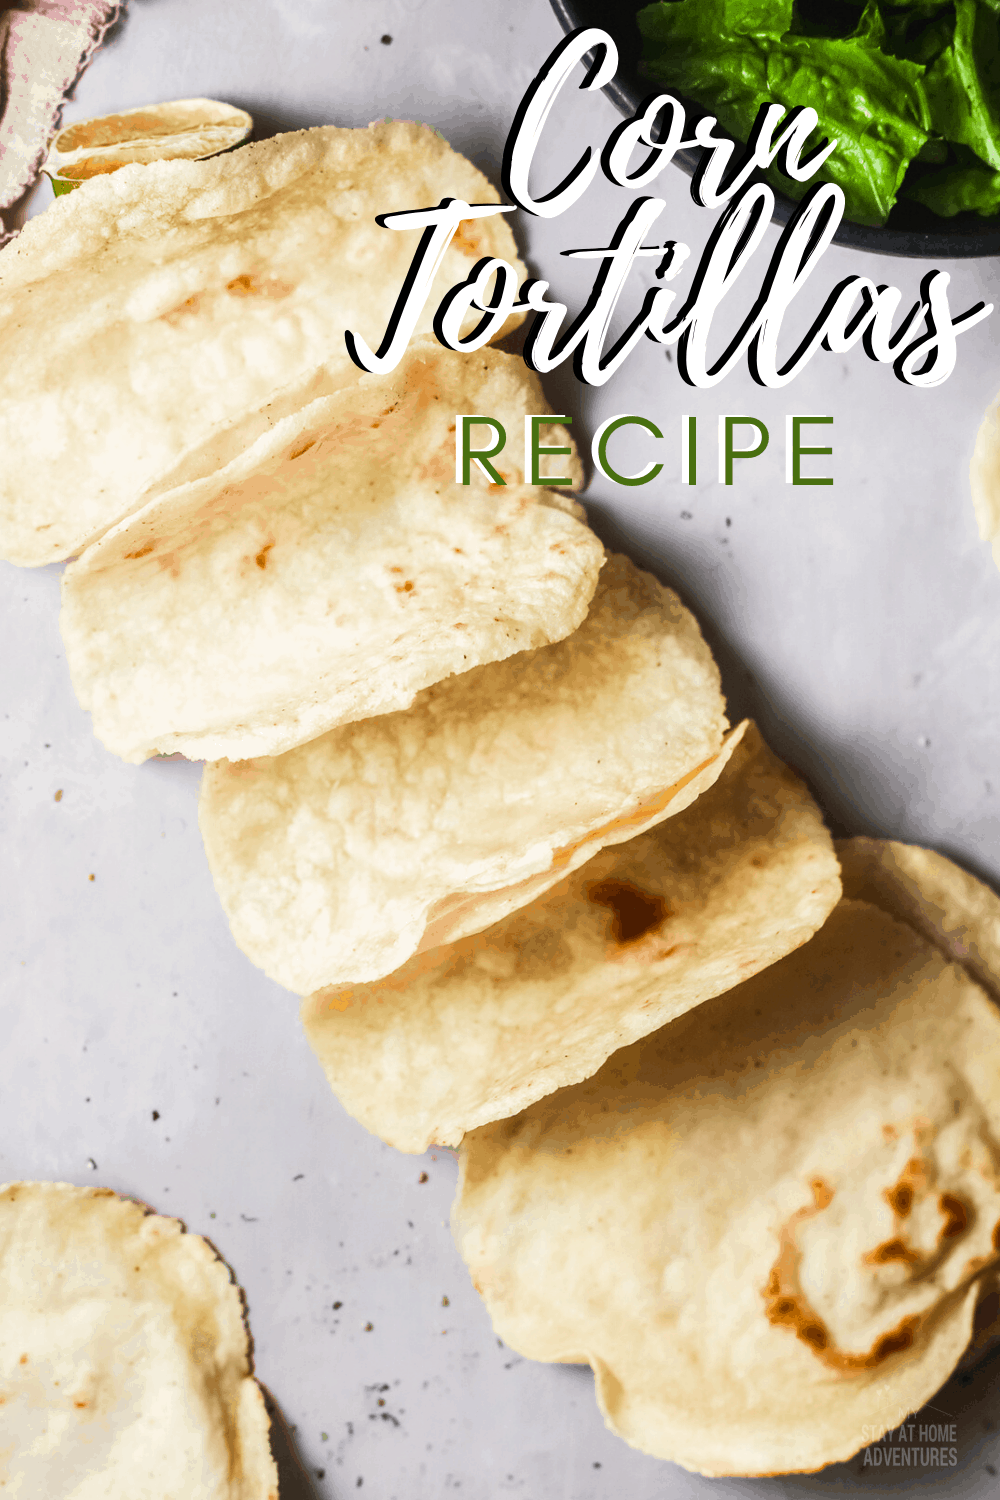 Learn how to create these super delicious homemade corn tortillas and you can even fry them too. Did we mention its only 2 ingredients? #tortilla #recipes #mexican #corntortillas via @mystayathome